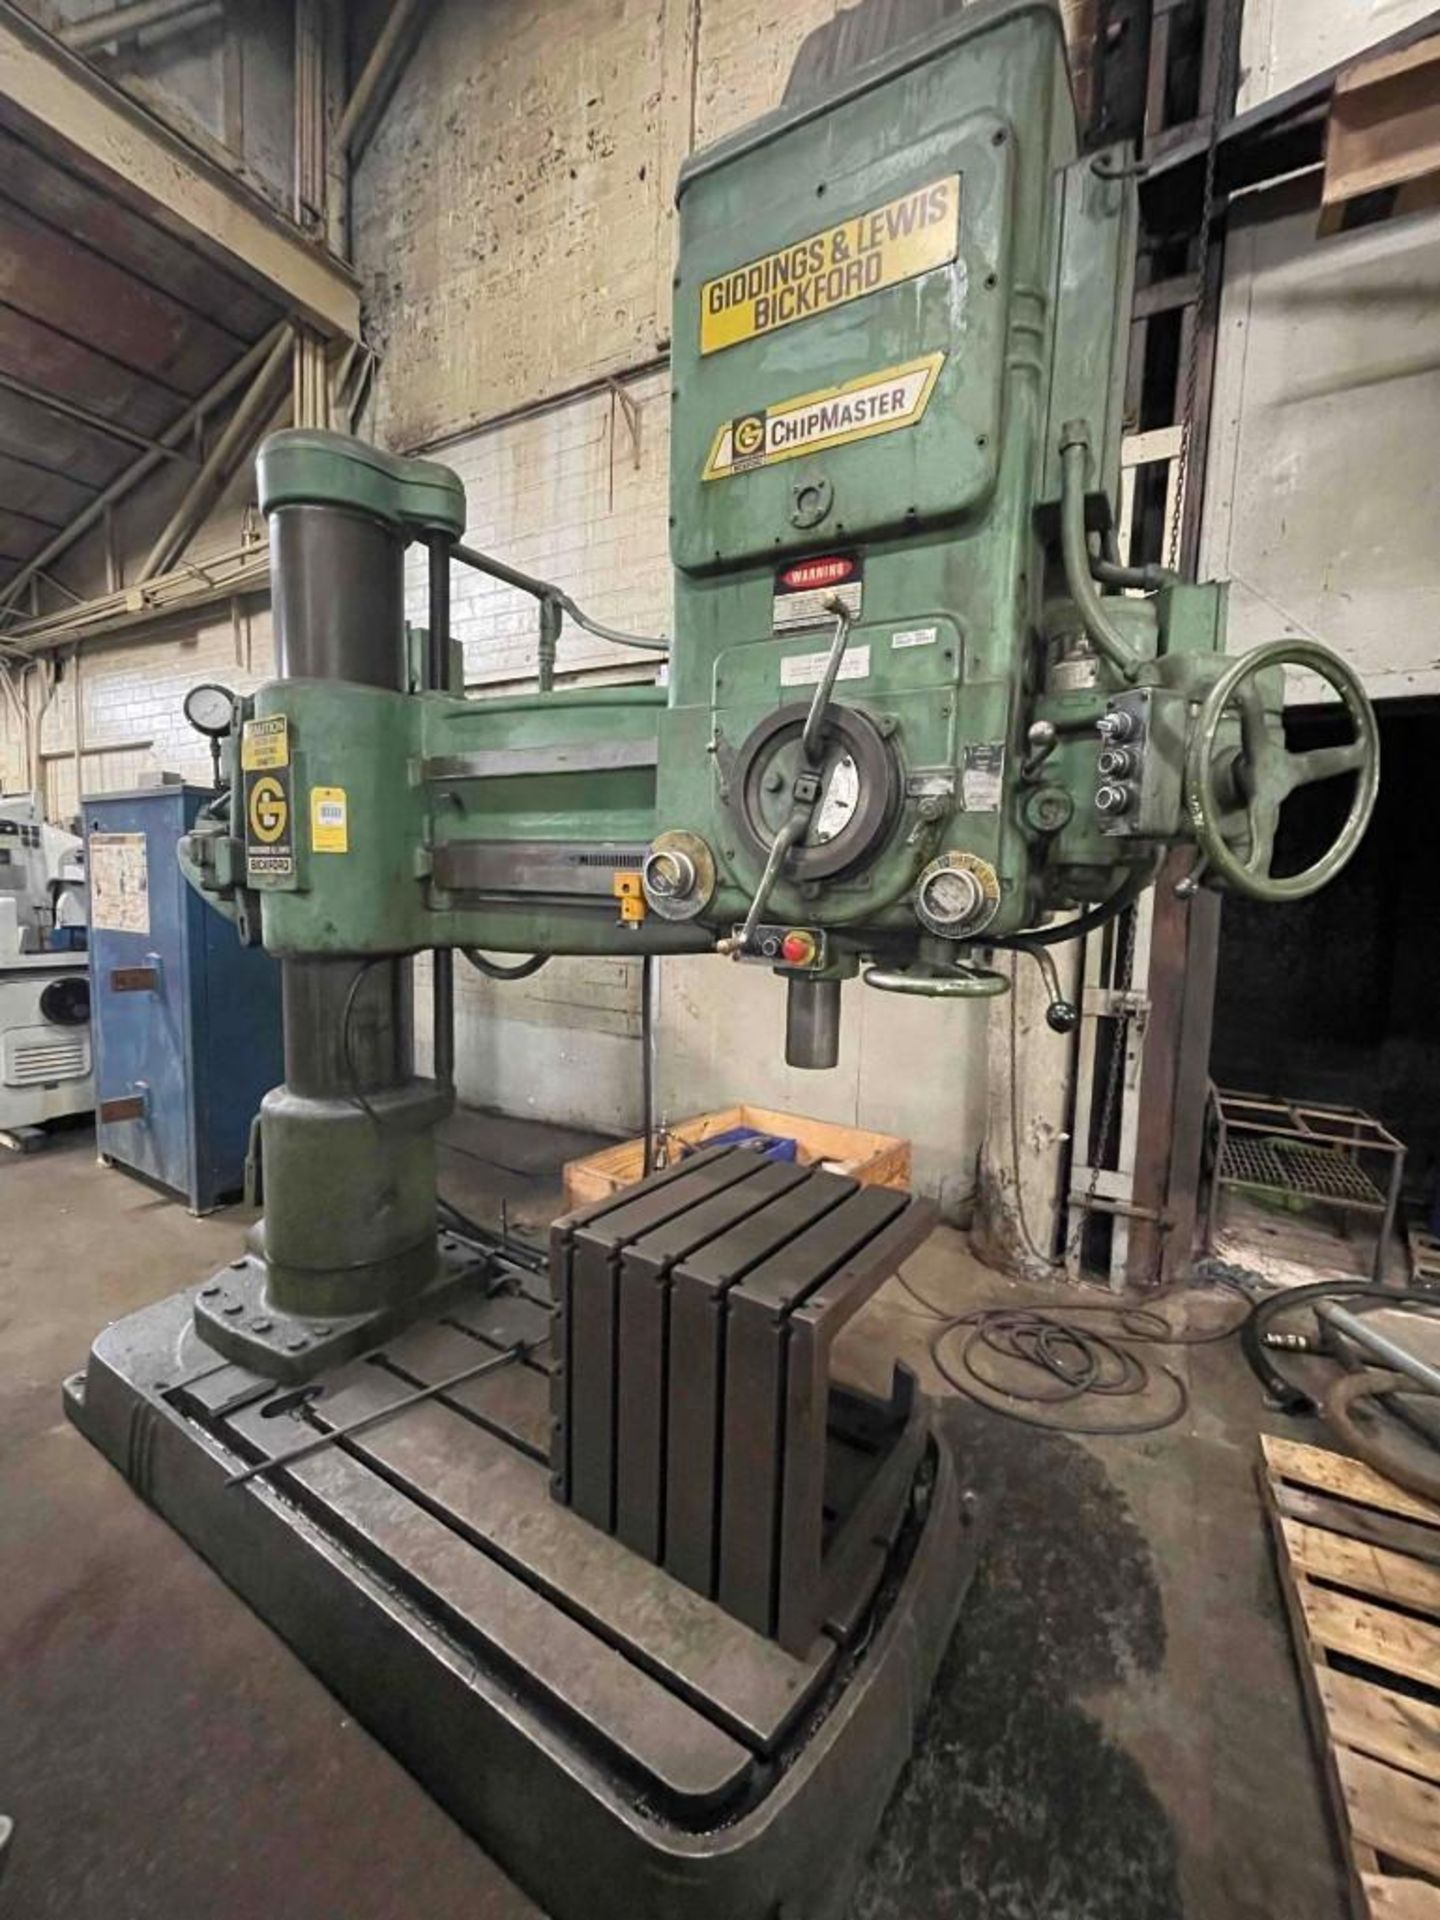 4' 13" Giddings & Lewis Brickford Chipmaster Radial Arm Drill; (OK location) - Image 2 of 14